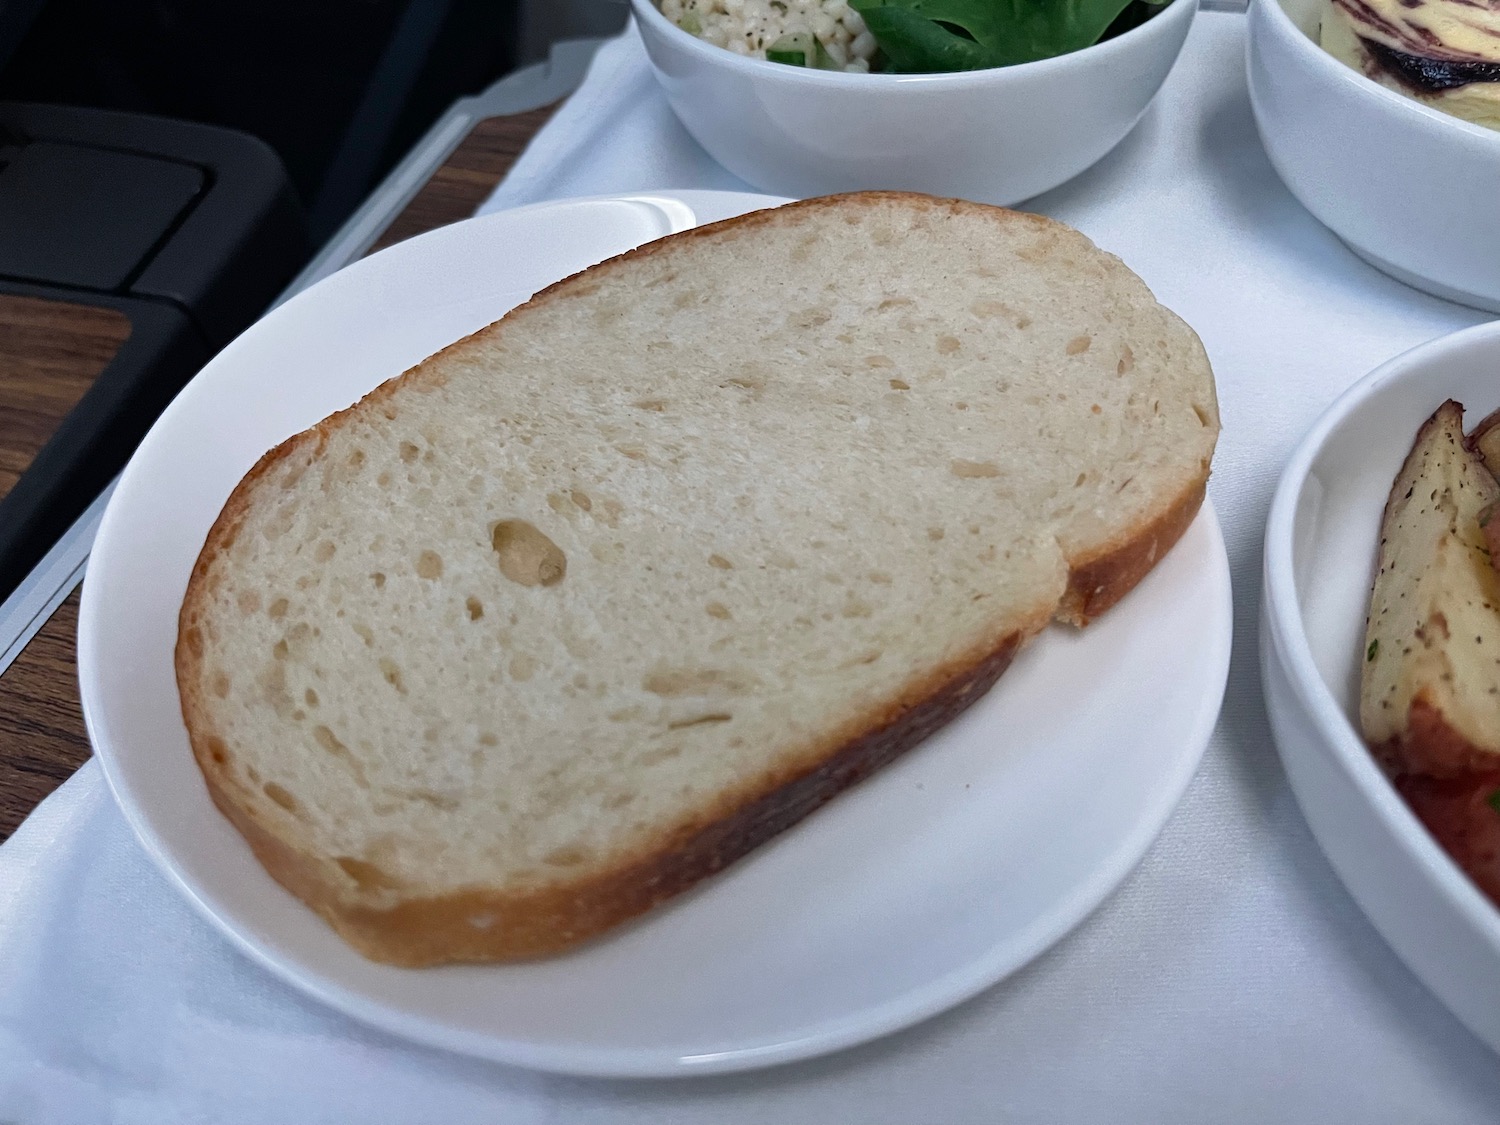 a slice of bread on a plate